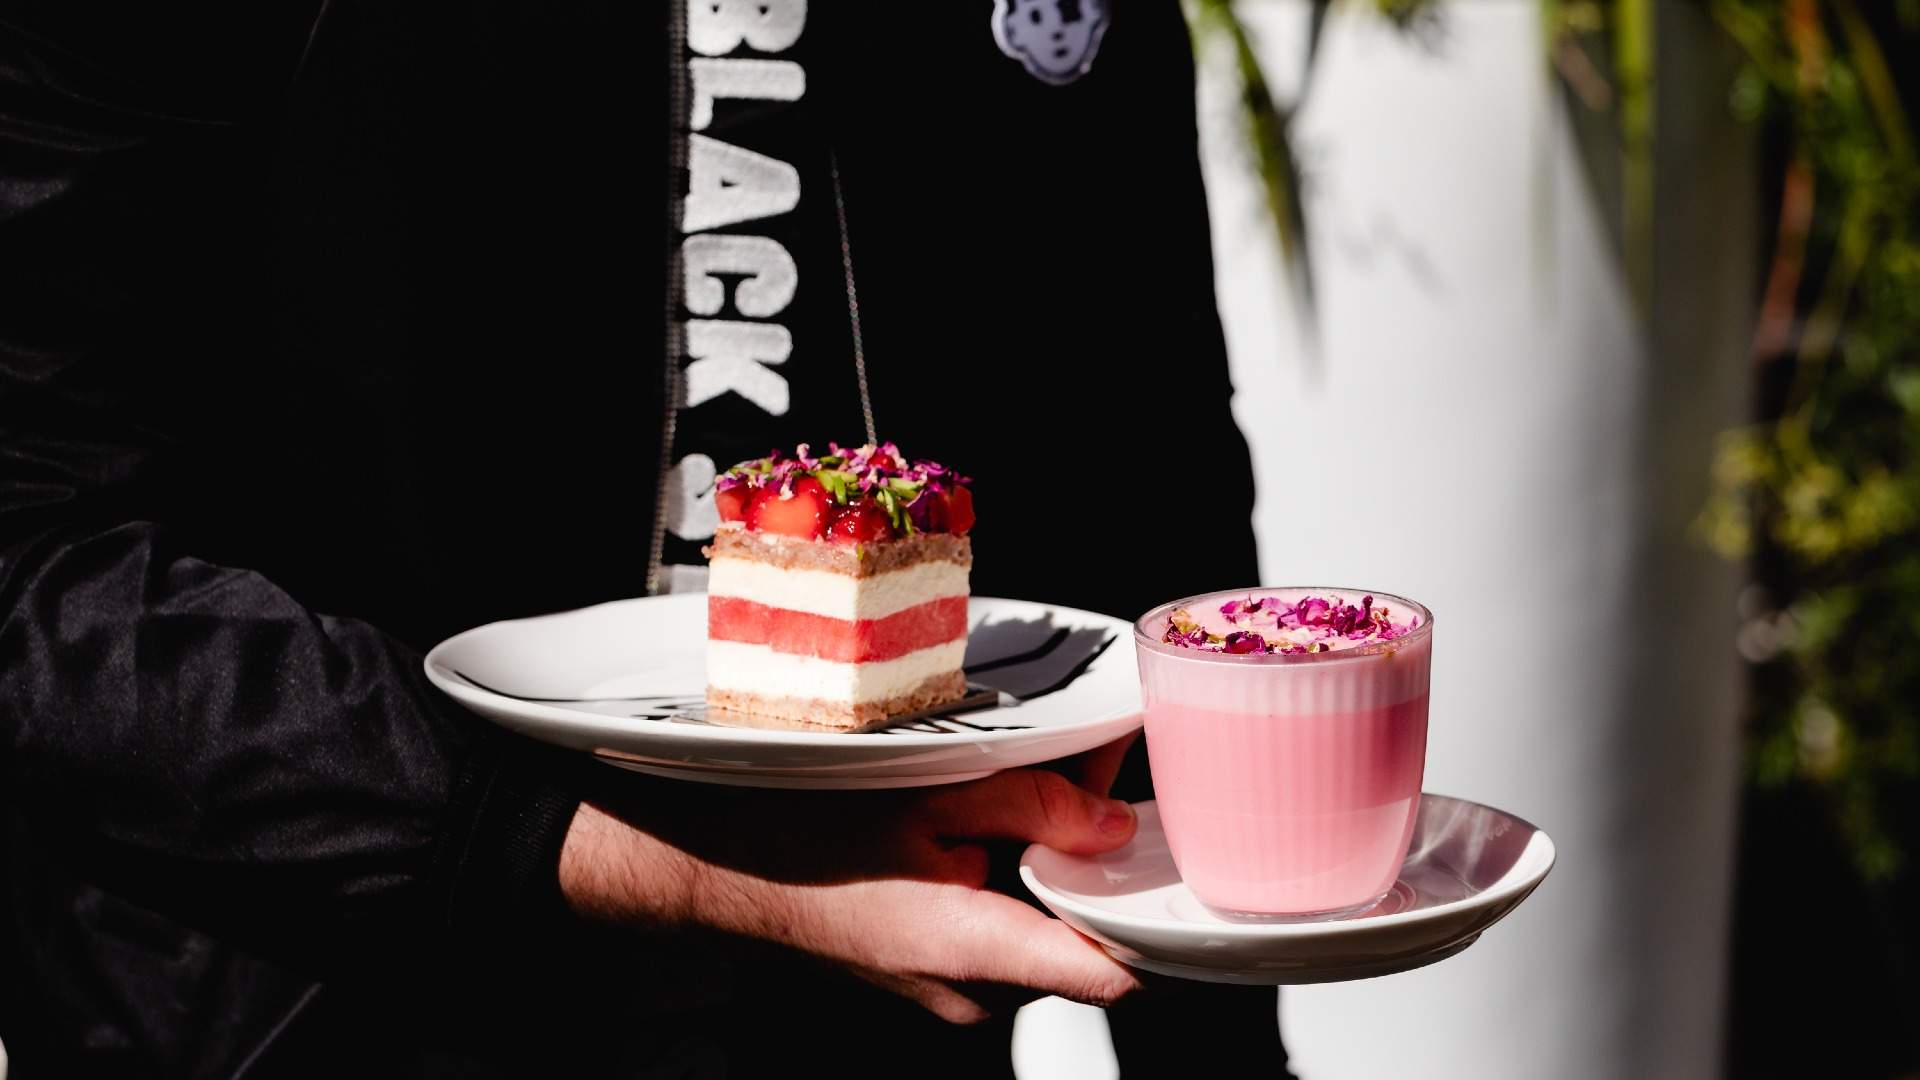 Black Star Pastry Just Dropped a Couple of New Hot Drinks Based on Two of Its Famous Cakes